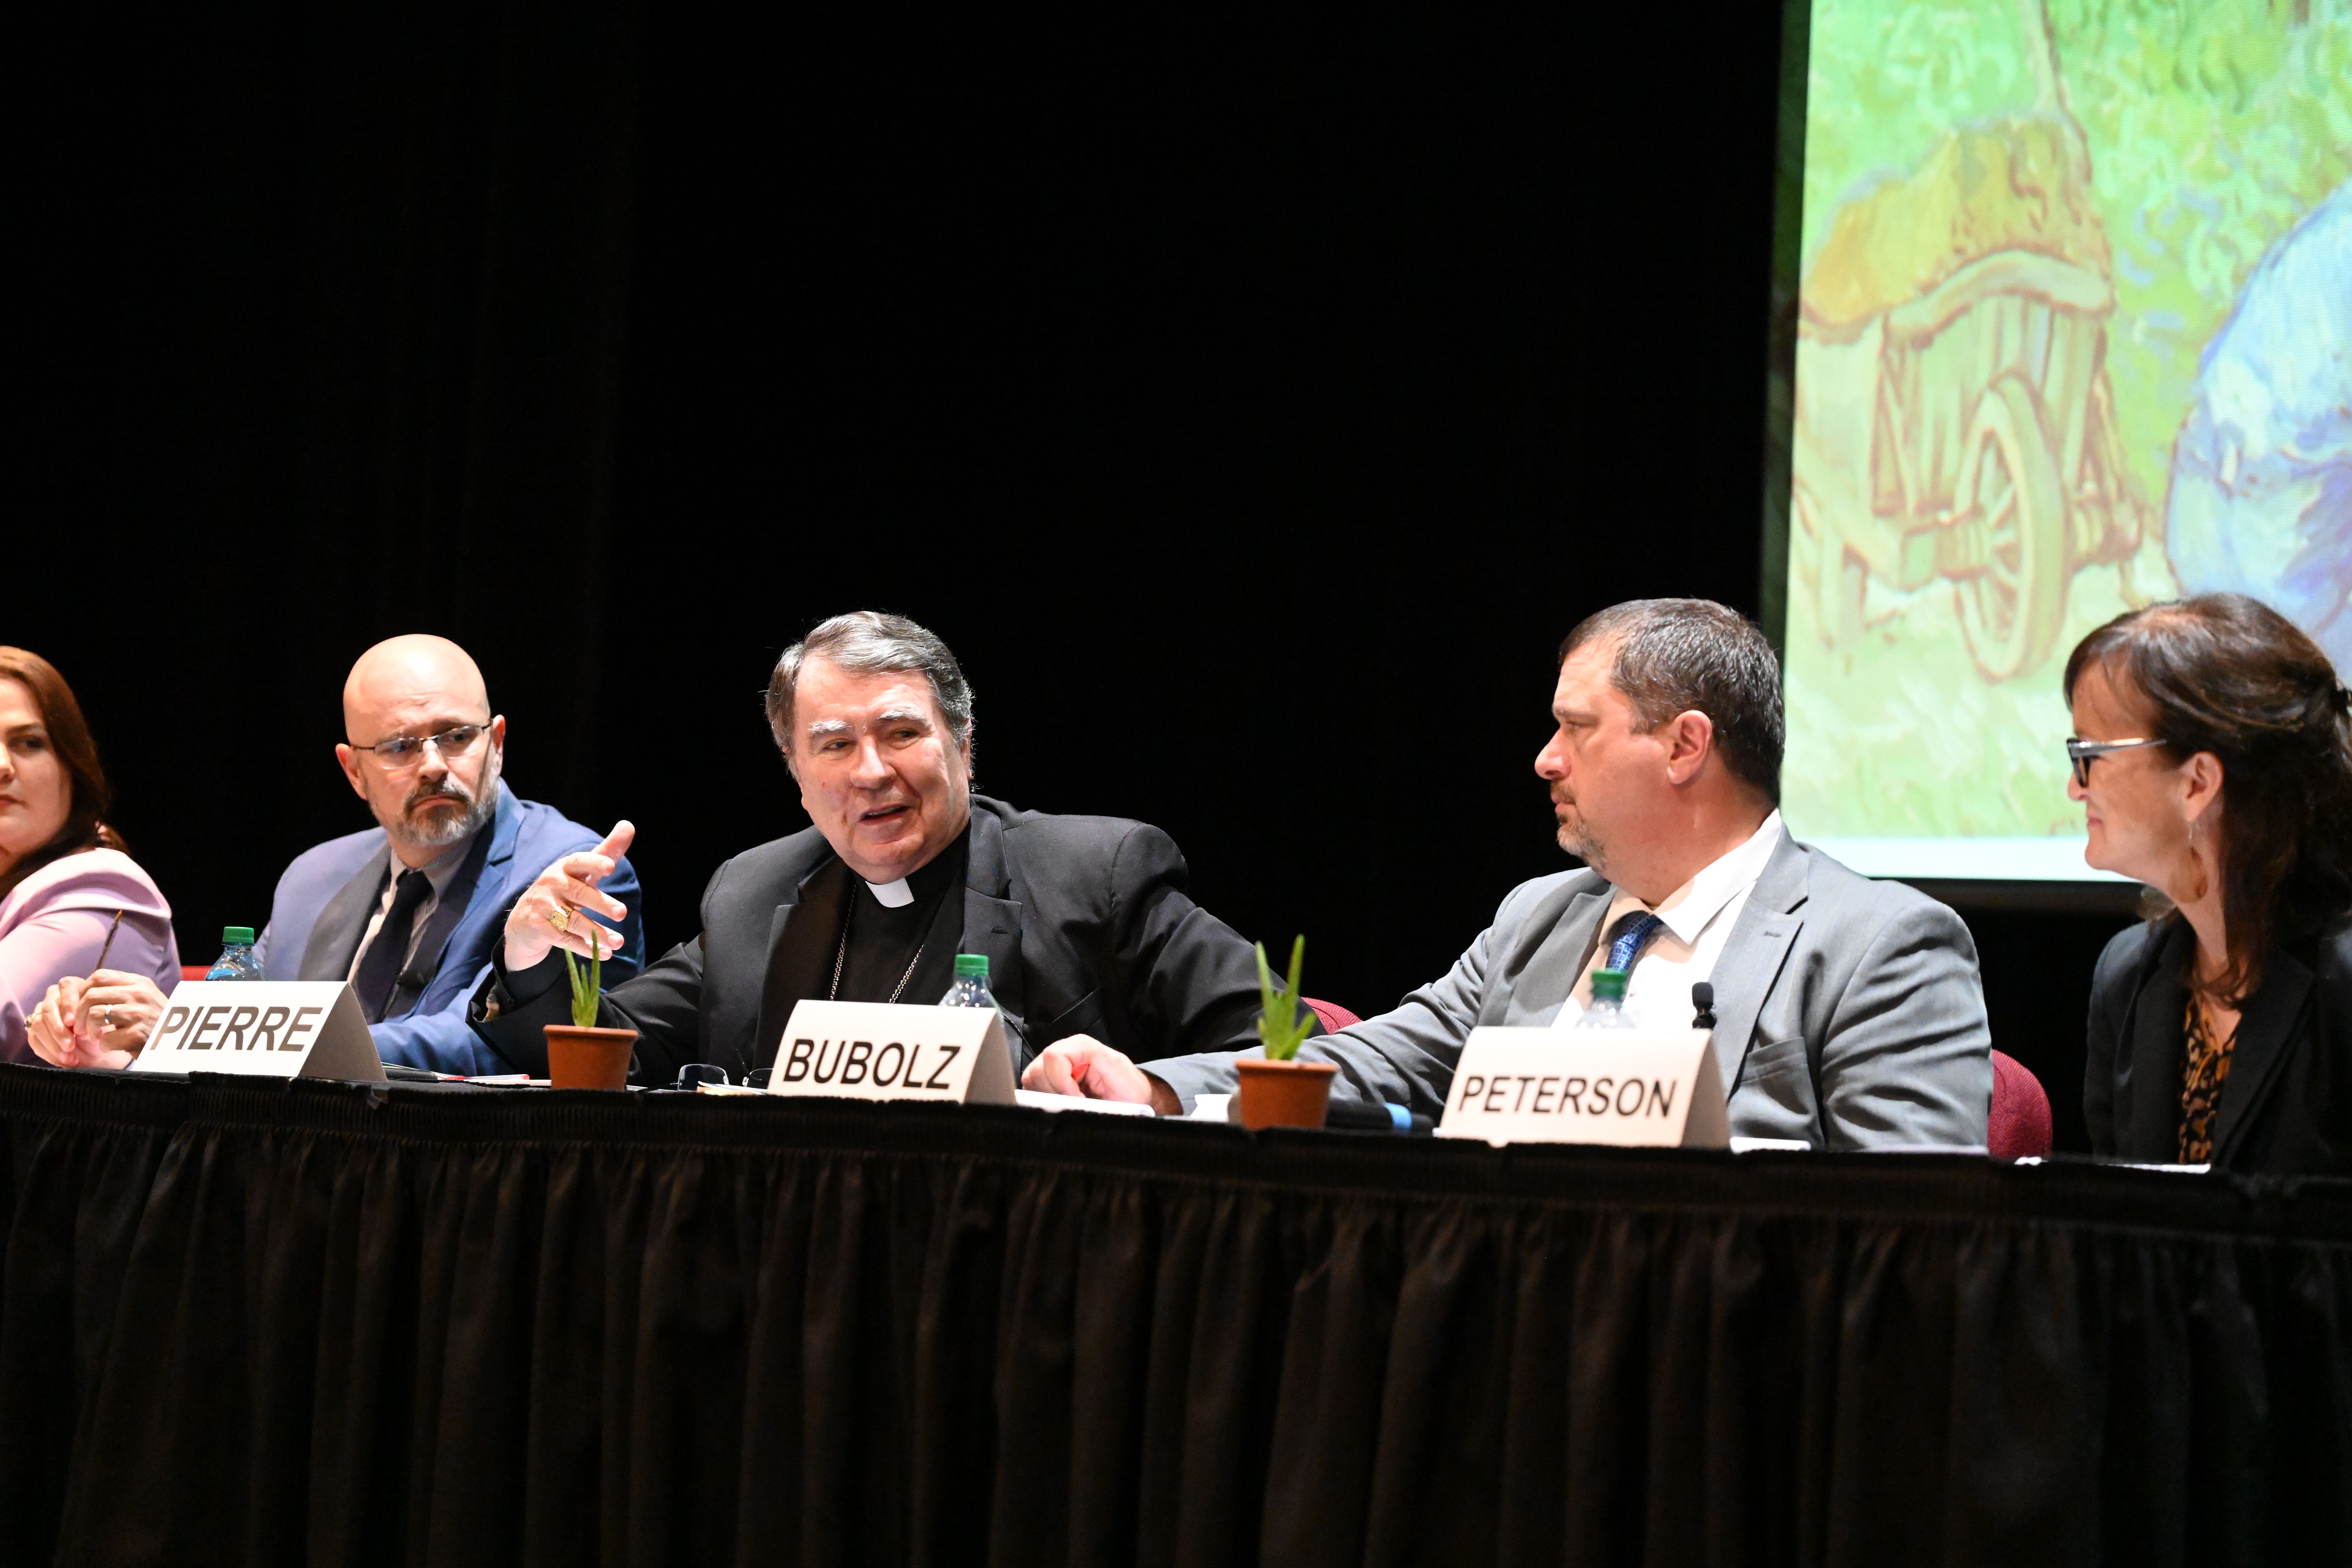 A panel of educational experts discuss “The Risk of Education” by Fr. Luigi Giussani. Throughout his life, education was of Father Giussani’s primary intellectual interests. Photo by Teresa Peterson.